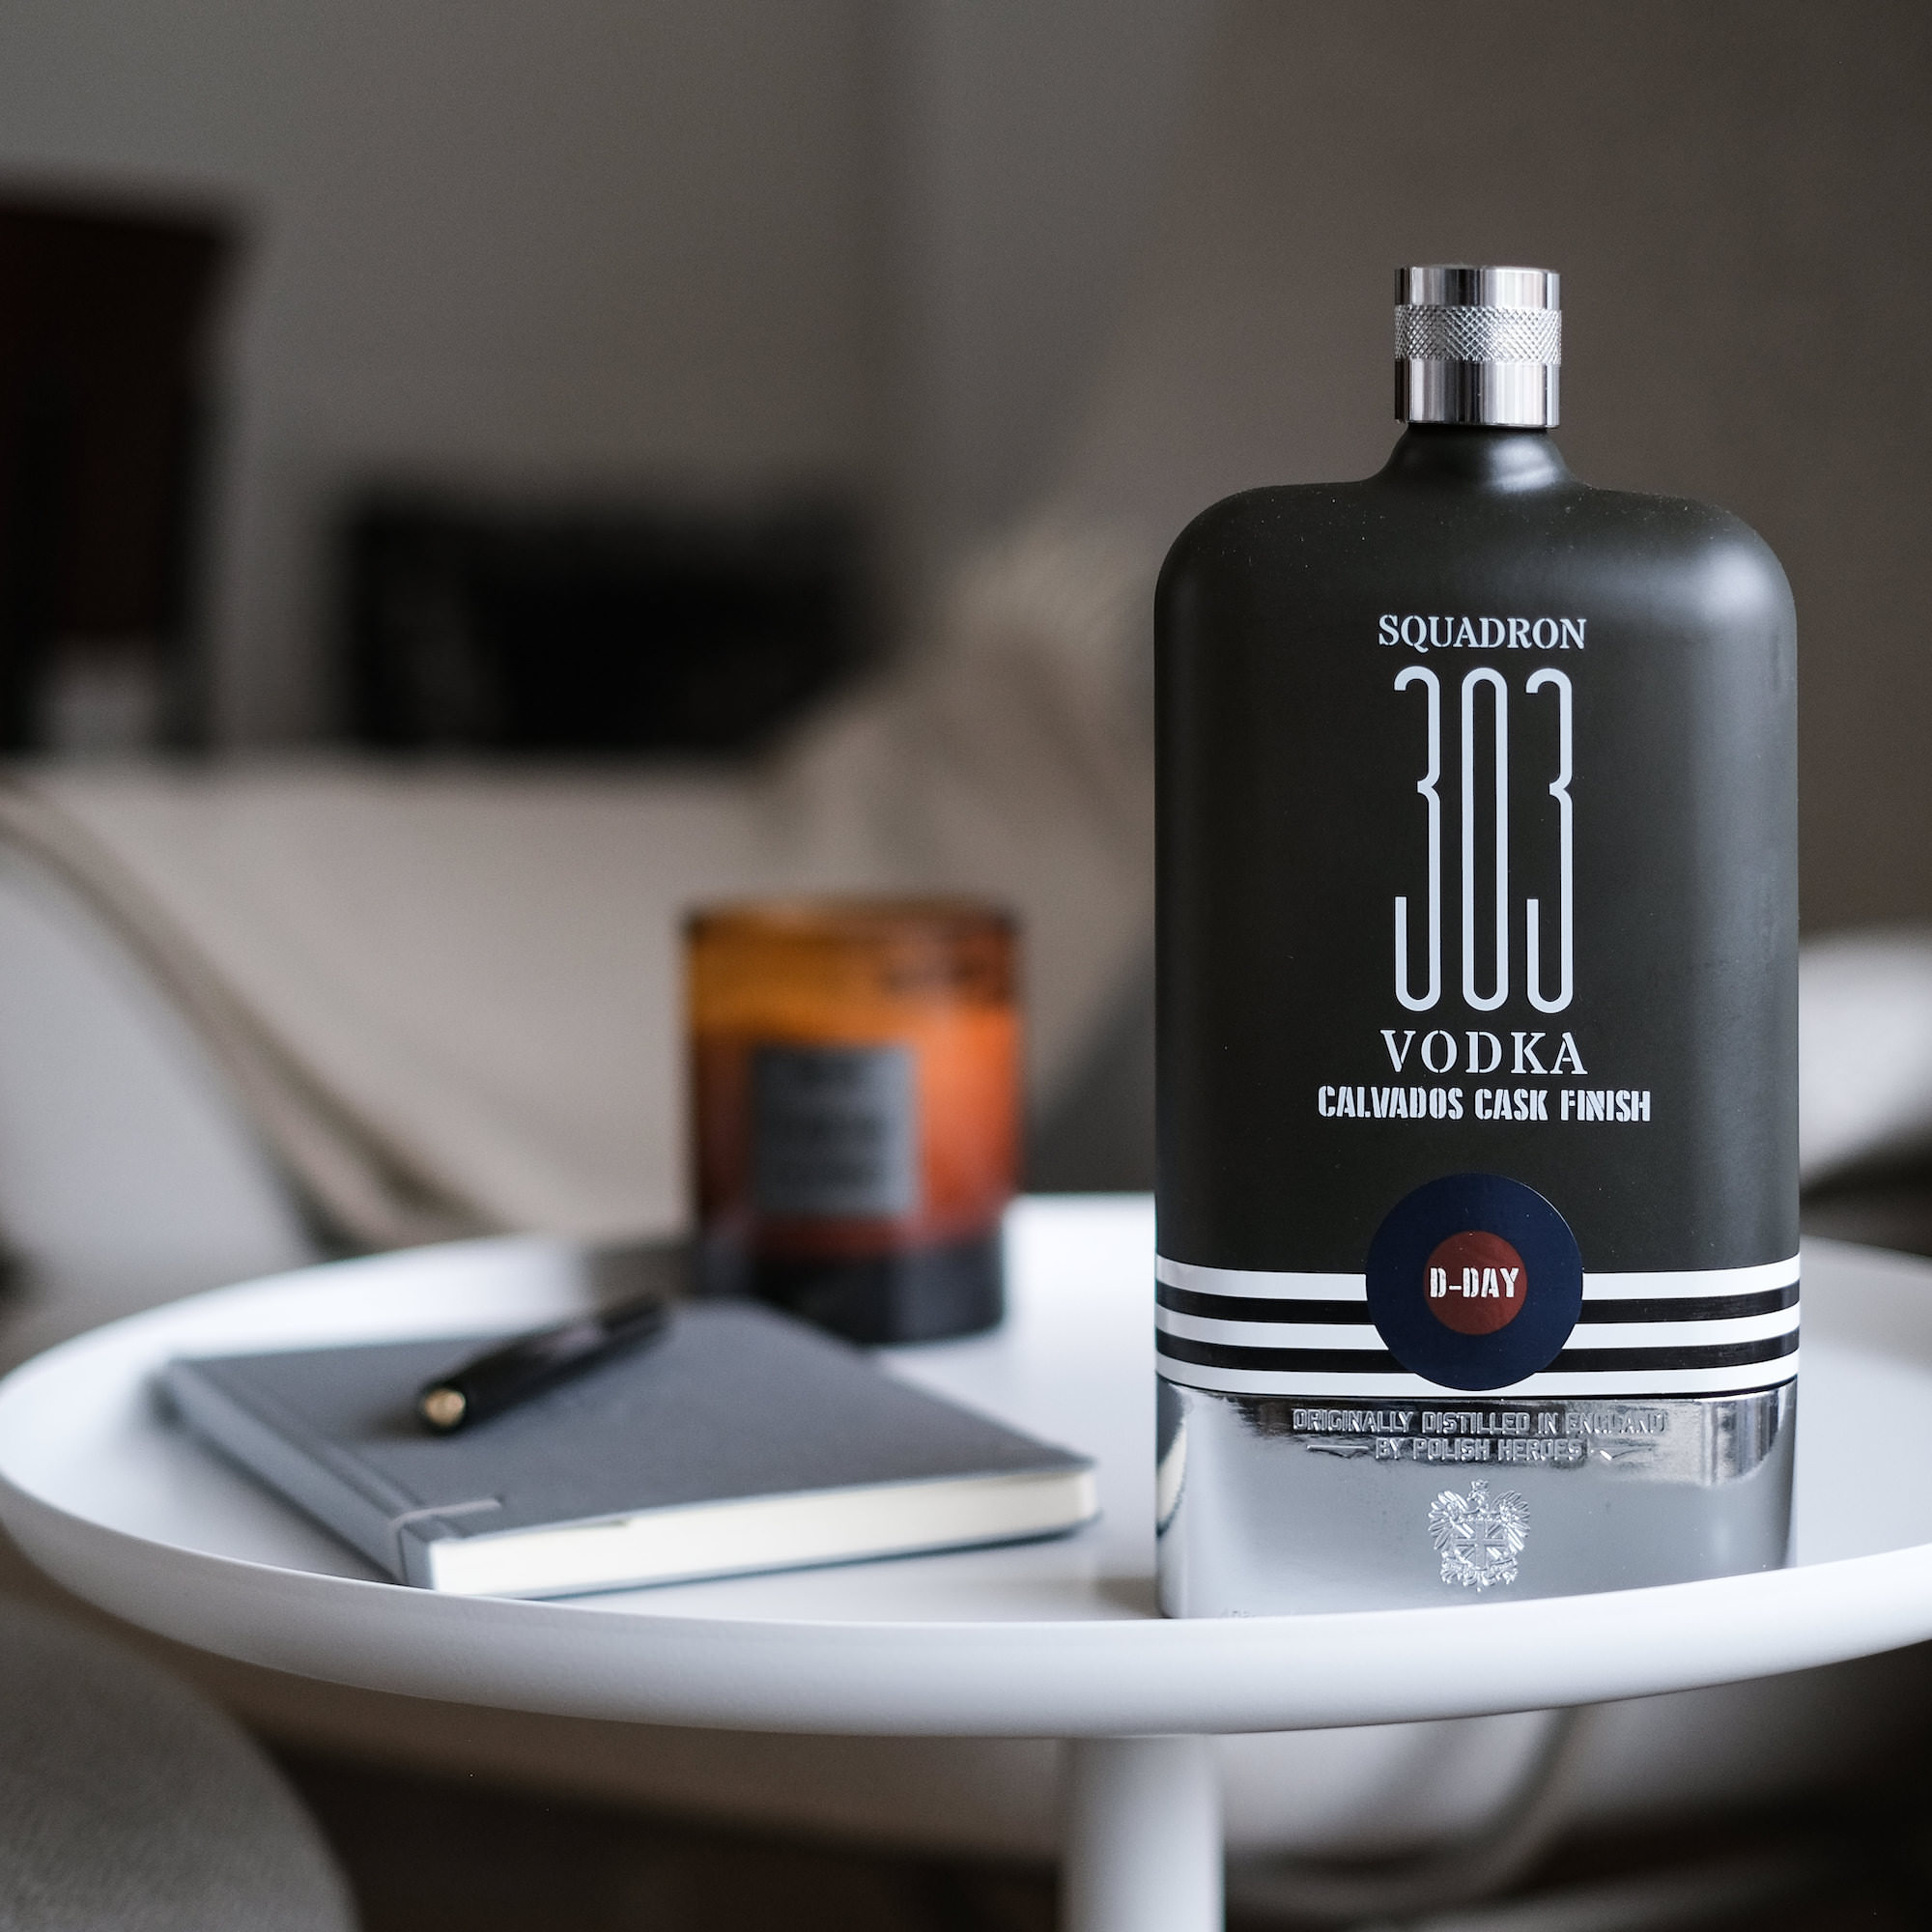 squadron 303 vodka Calvados cask finish d day originally distilled in england by polish heroes